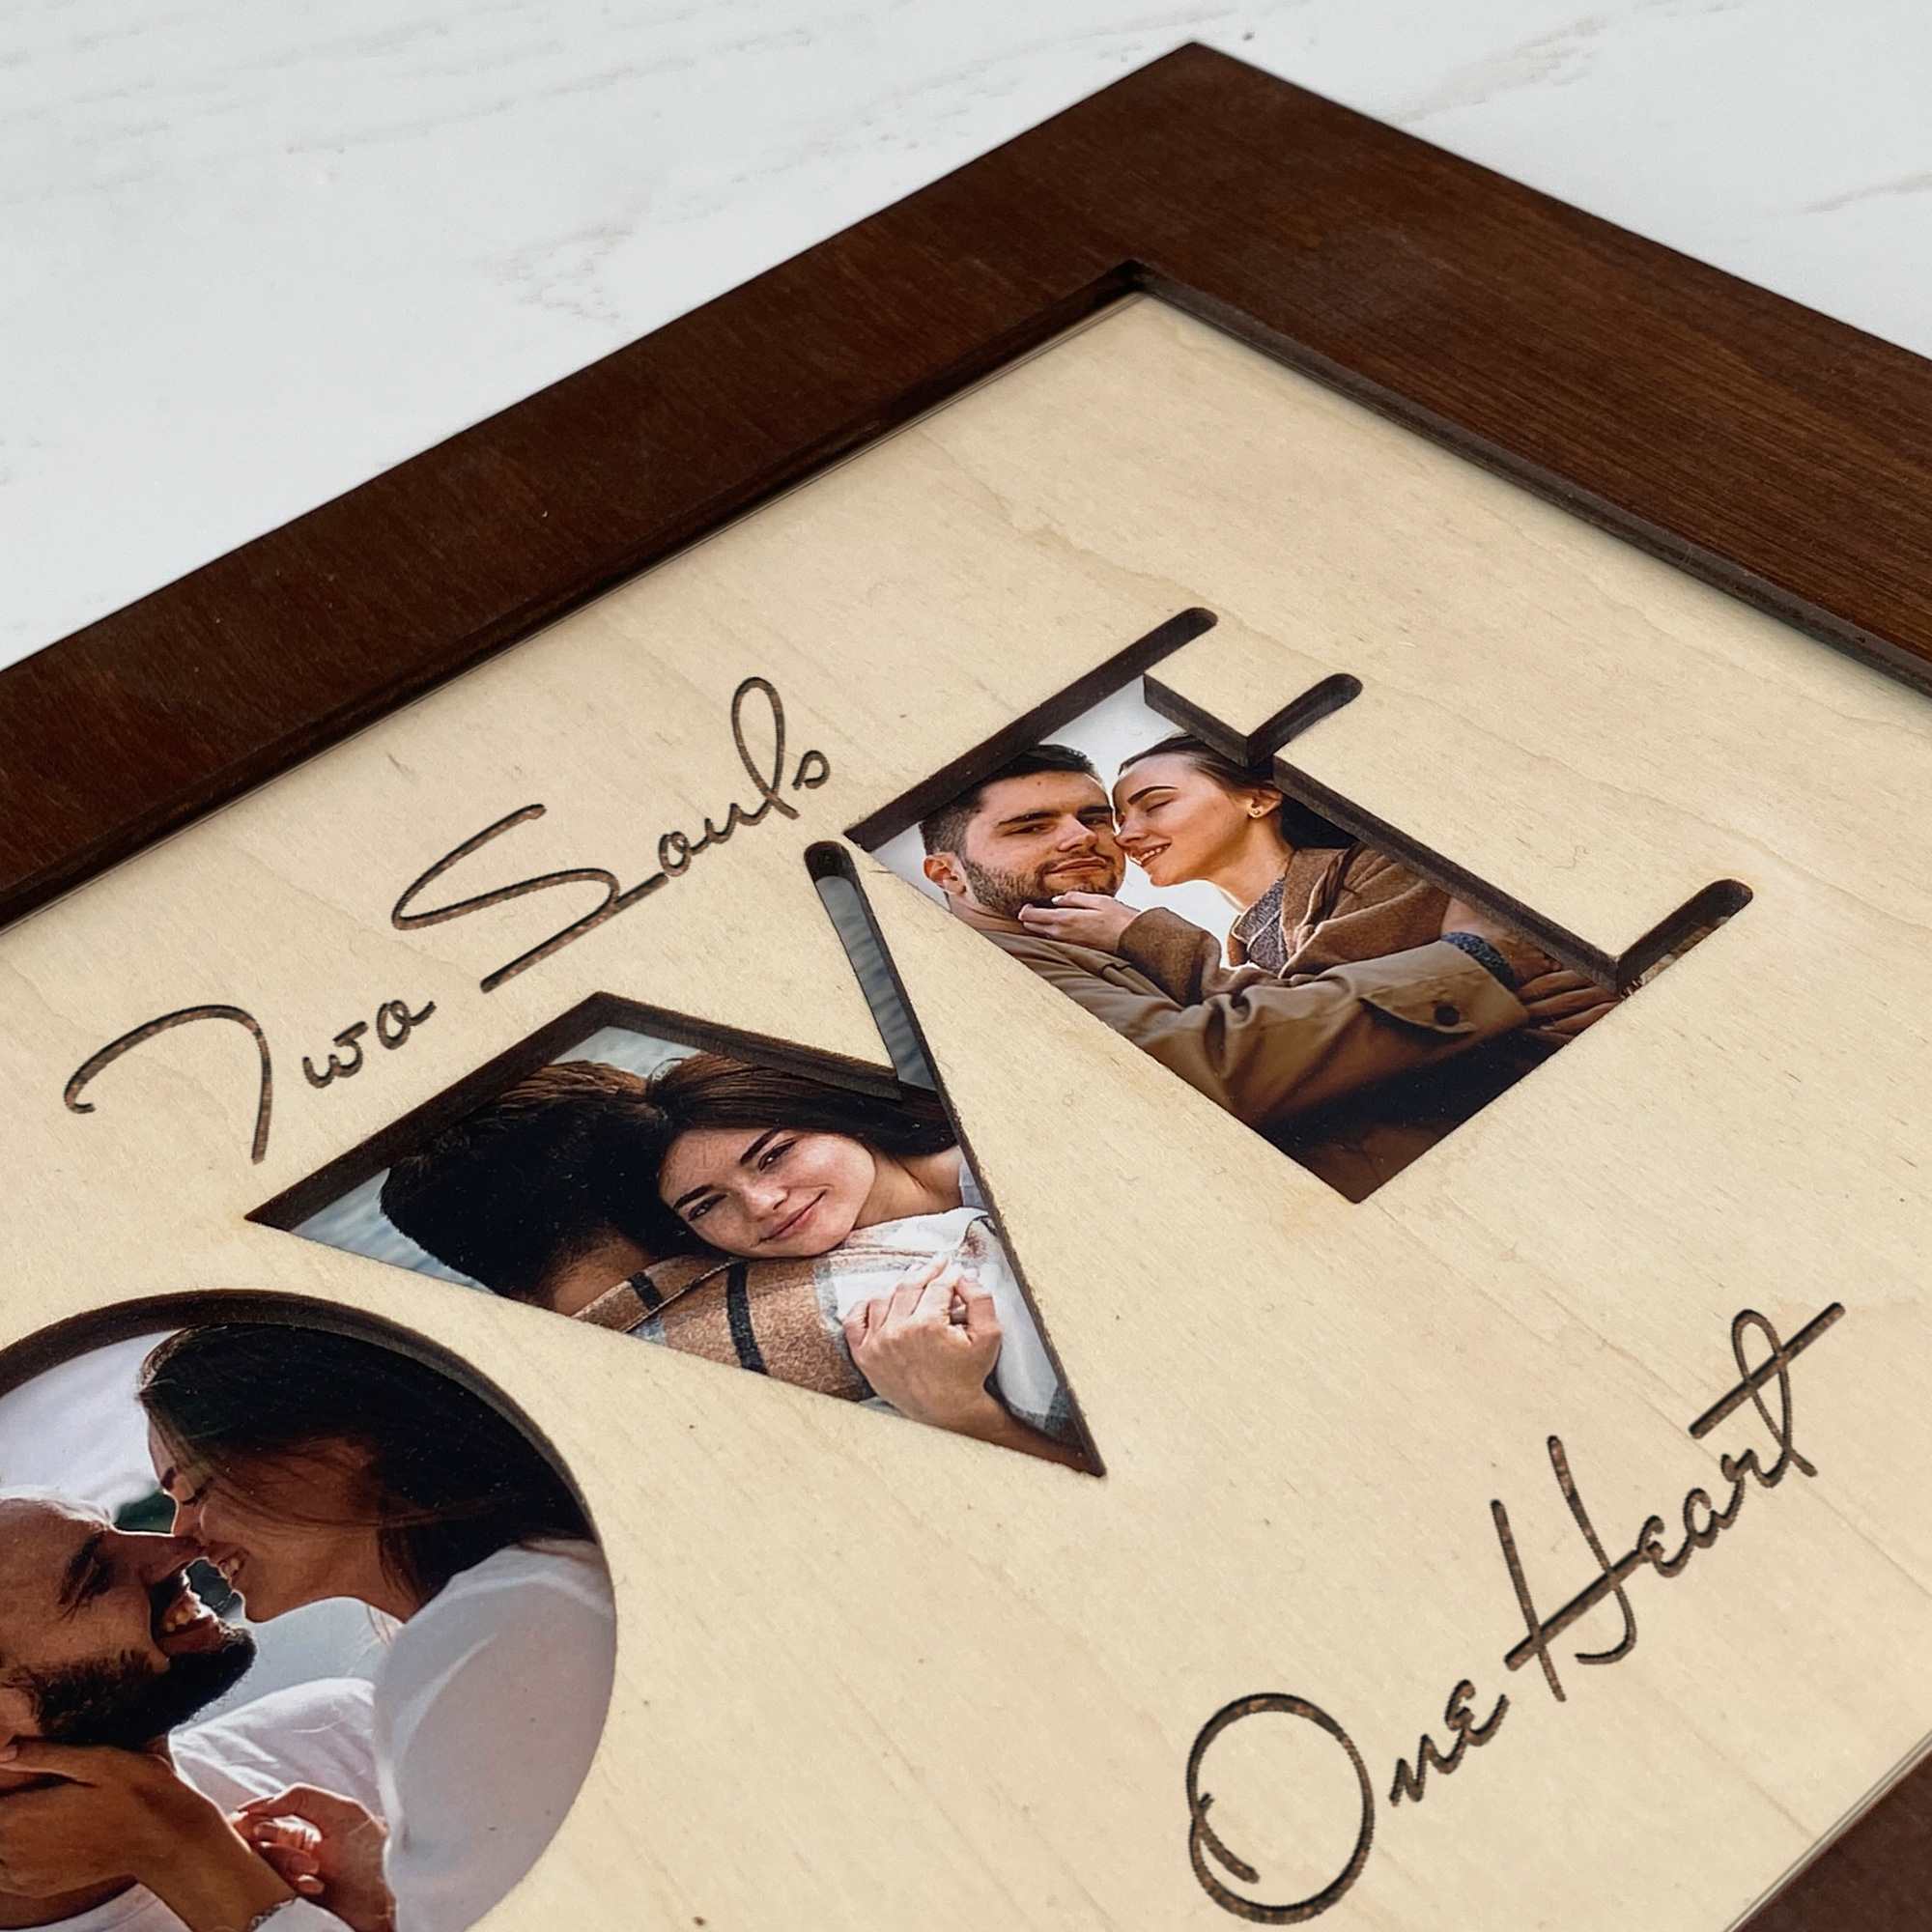 Summer Enjoyment Wood Rectangle Setting, Wood Photo Frame Base, Wooden  Picture Frames Postcard Frame For Crafts,Ideal Gift Wood Keychain Trays  Fashion Design for Birthday Anniversary Christmas